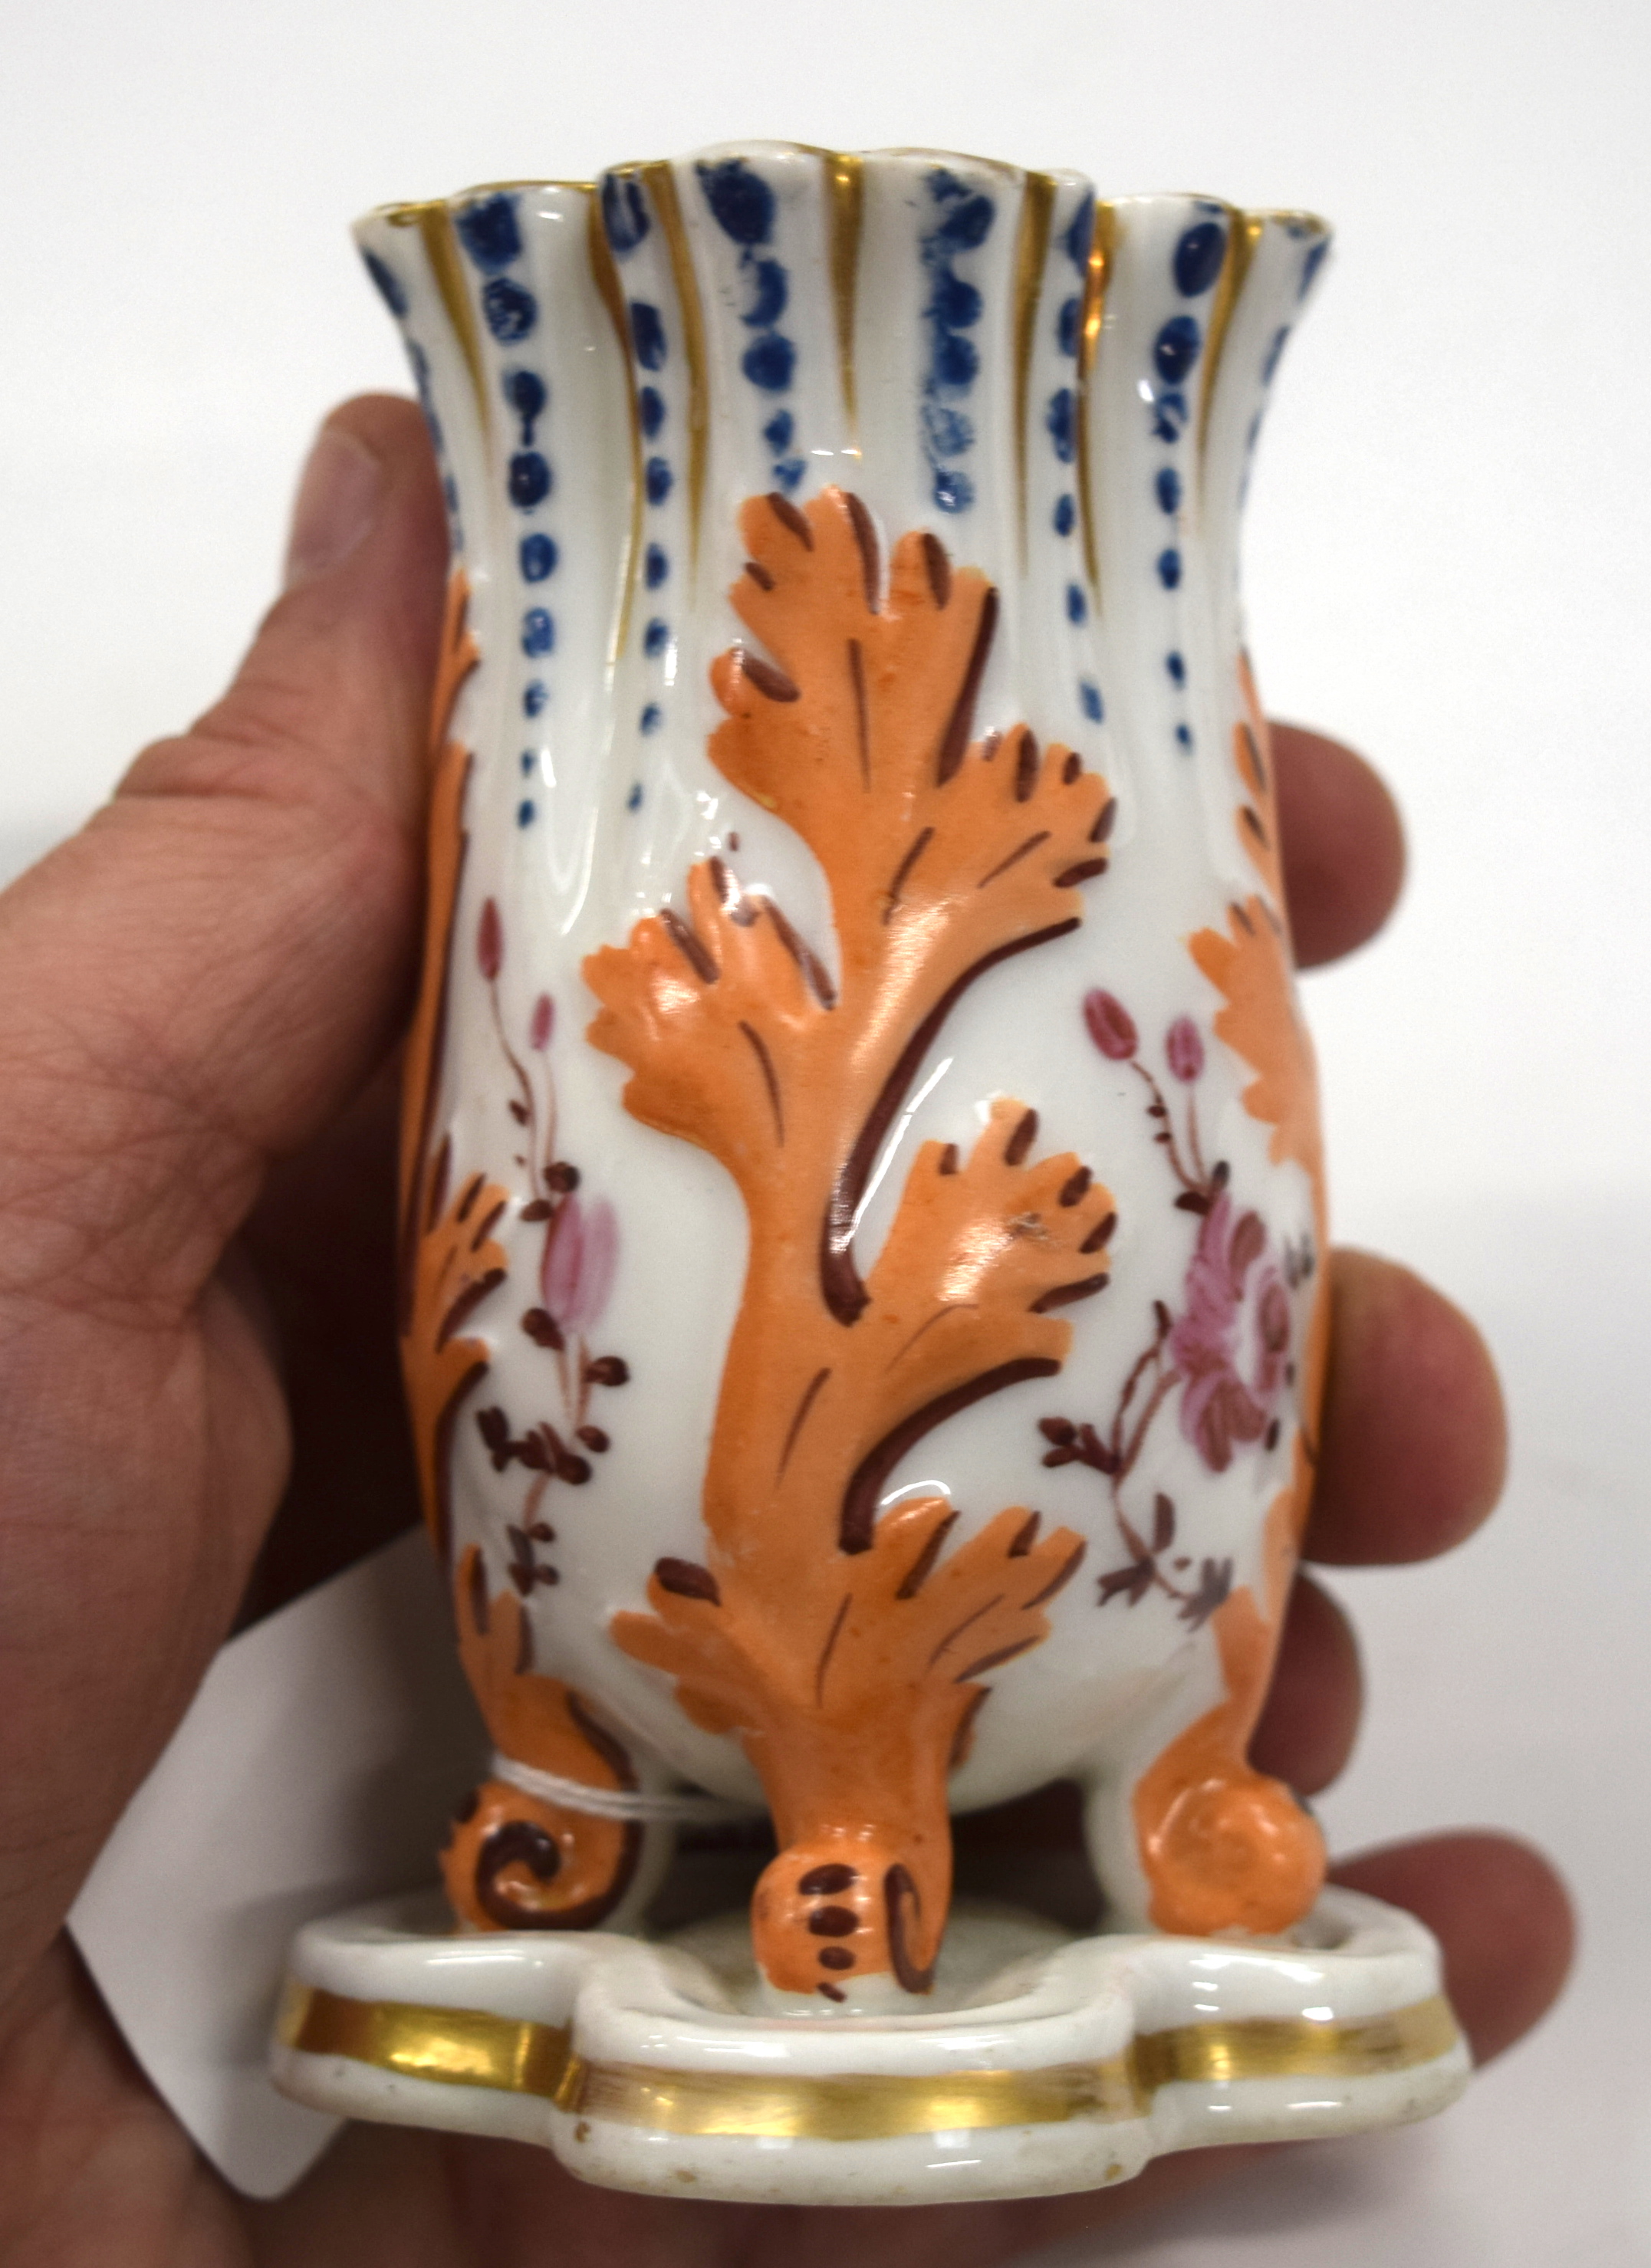 A PAIR OF ANTIQUE FRENCH PORCELAIN SPILL VASES. 12.5 cm high. - Image 2 of 3